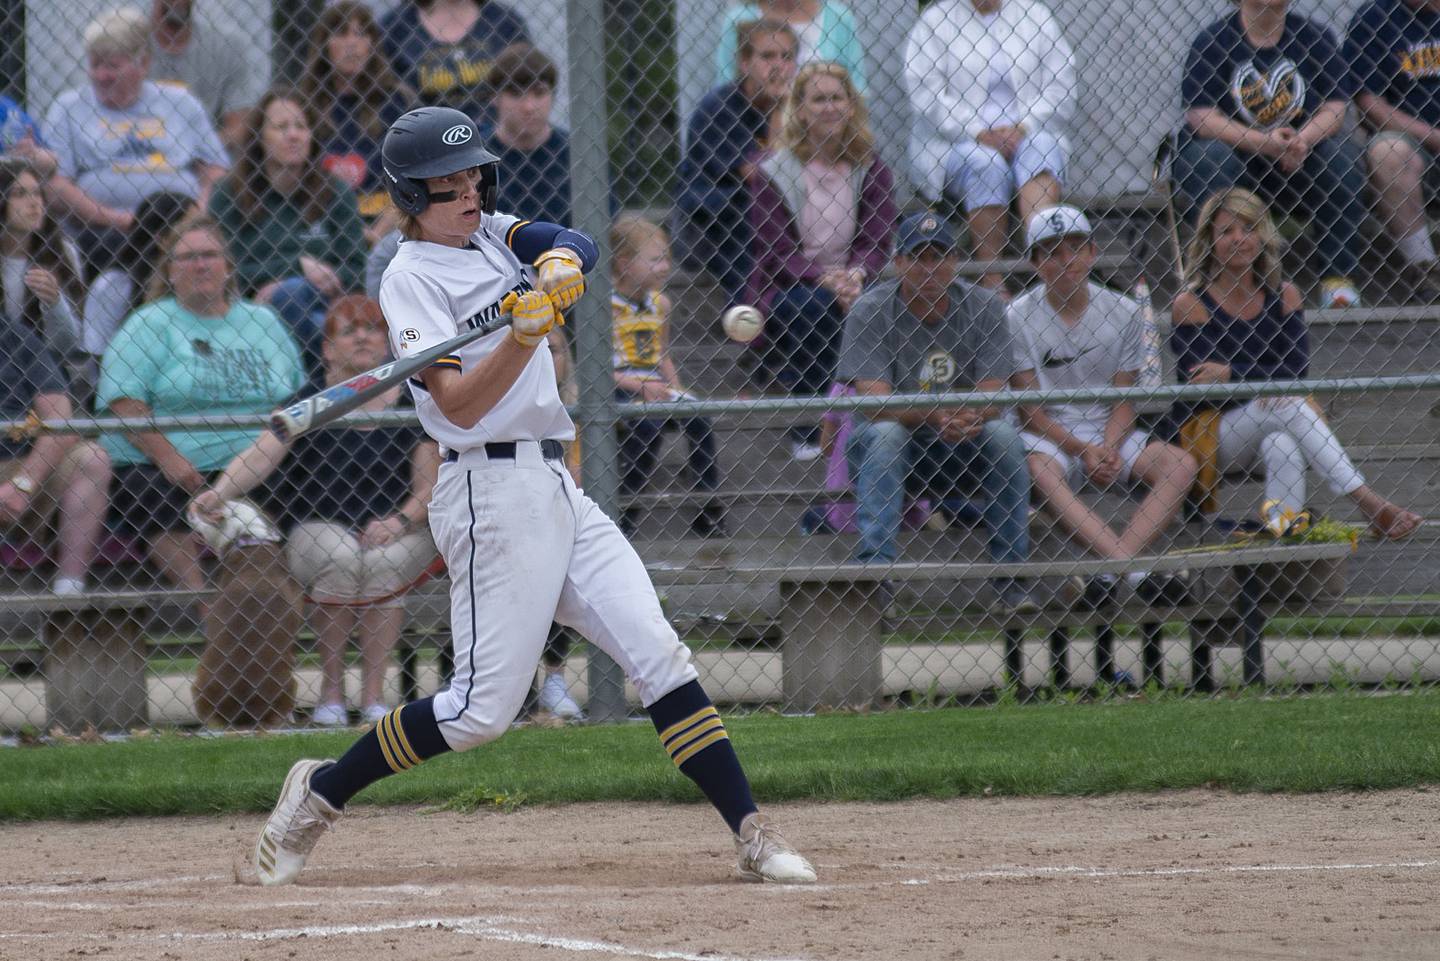 Sterling’s Ethan Janssen drives the ball to third base for an inning ending double play Tuesday, May 17, 2022 against Dixon.